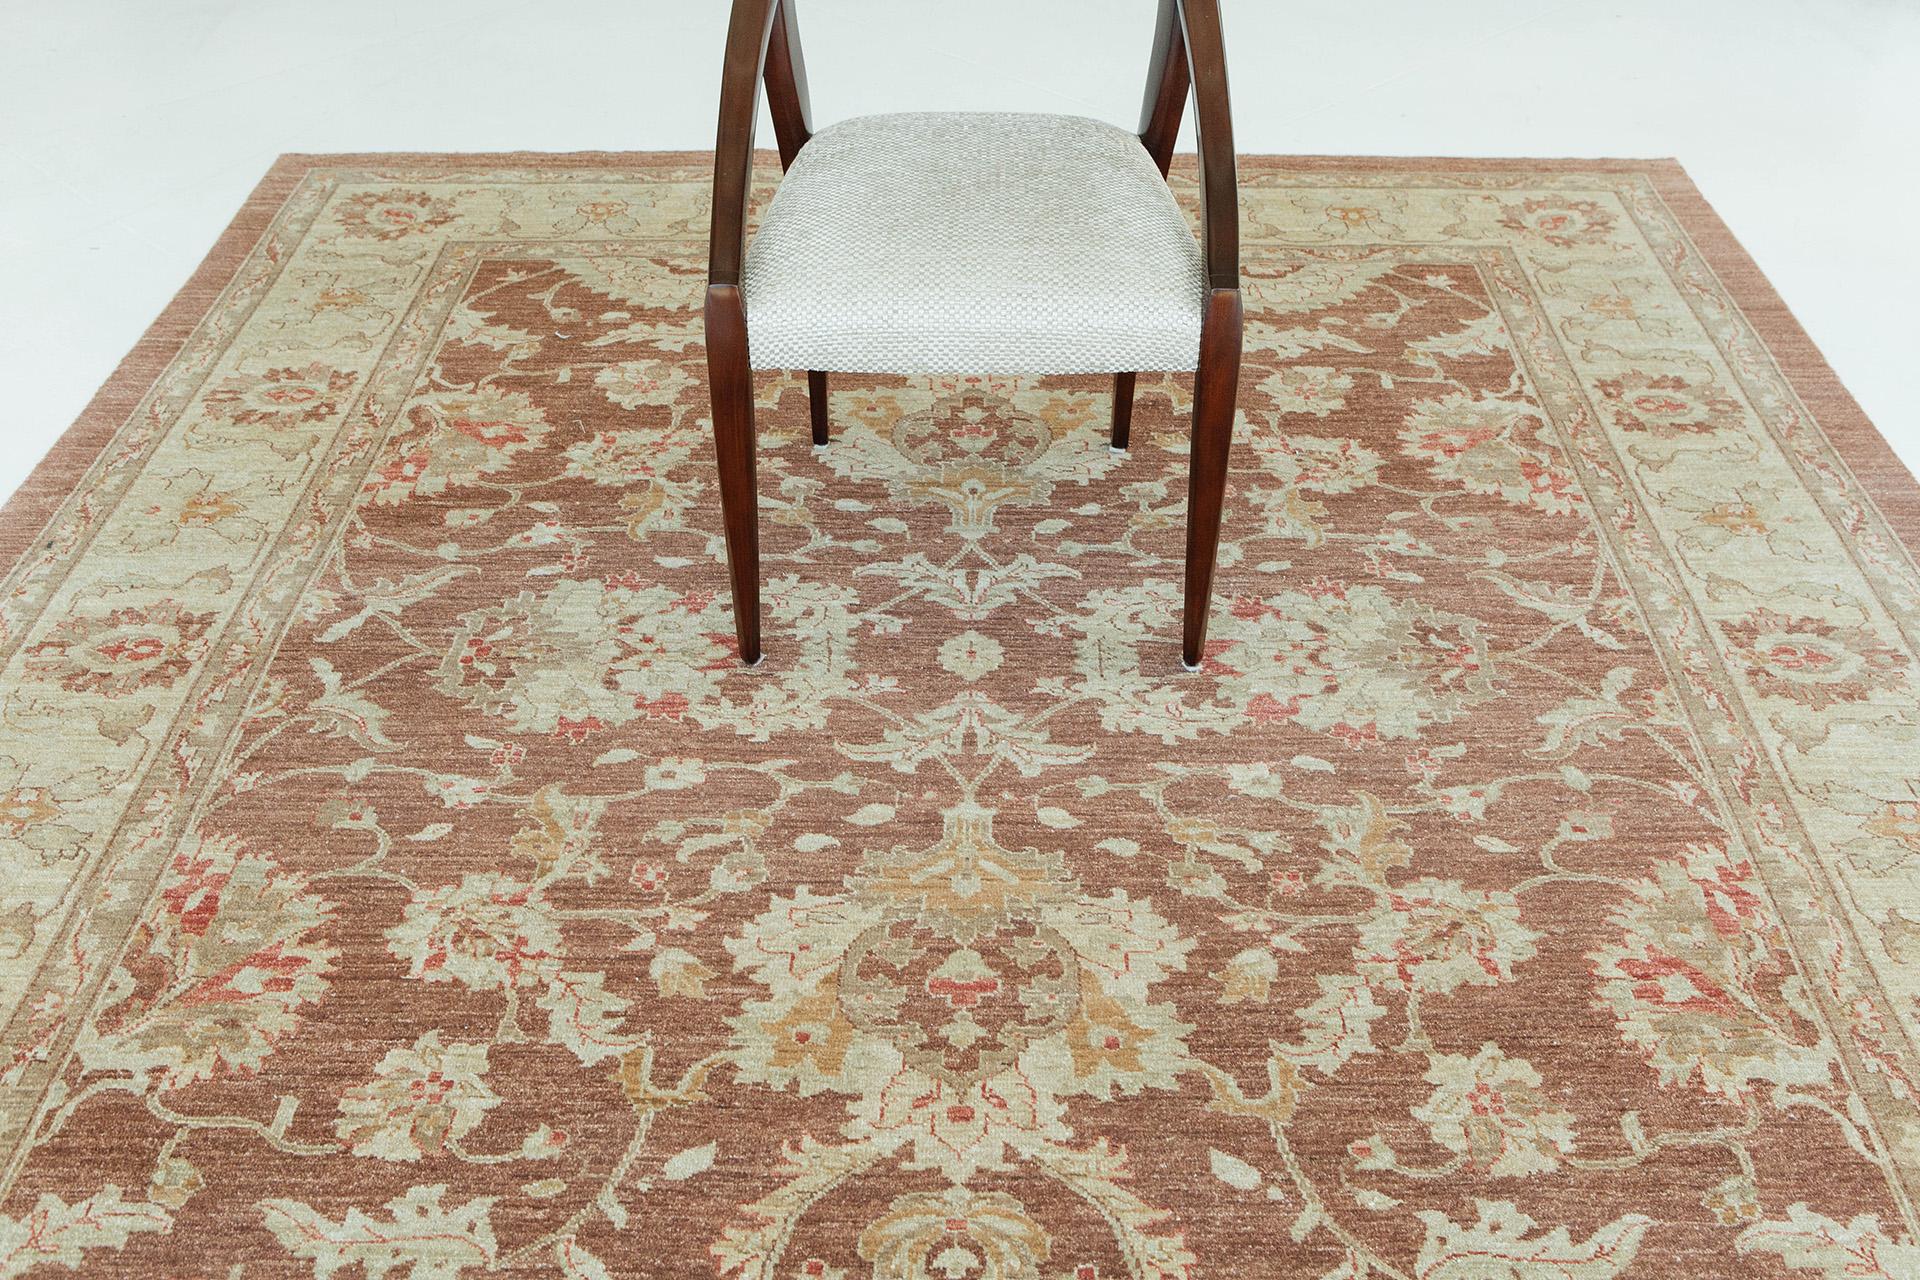 One of the finest collections from Traditional Re-creation, that has a distinctive and complete pattern of Sultanabad rugs. The deep rose-red color has a compact variety of attractive burgundy foliage. The pile weave texture of the rug gives a plush